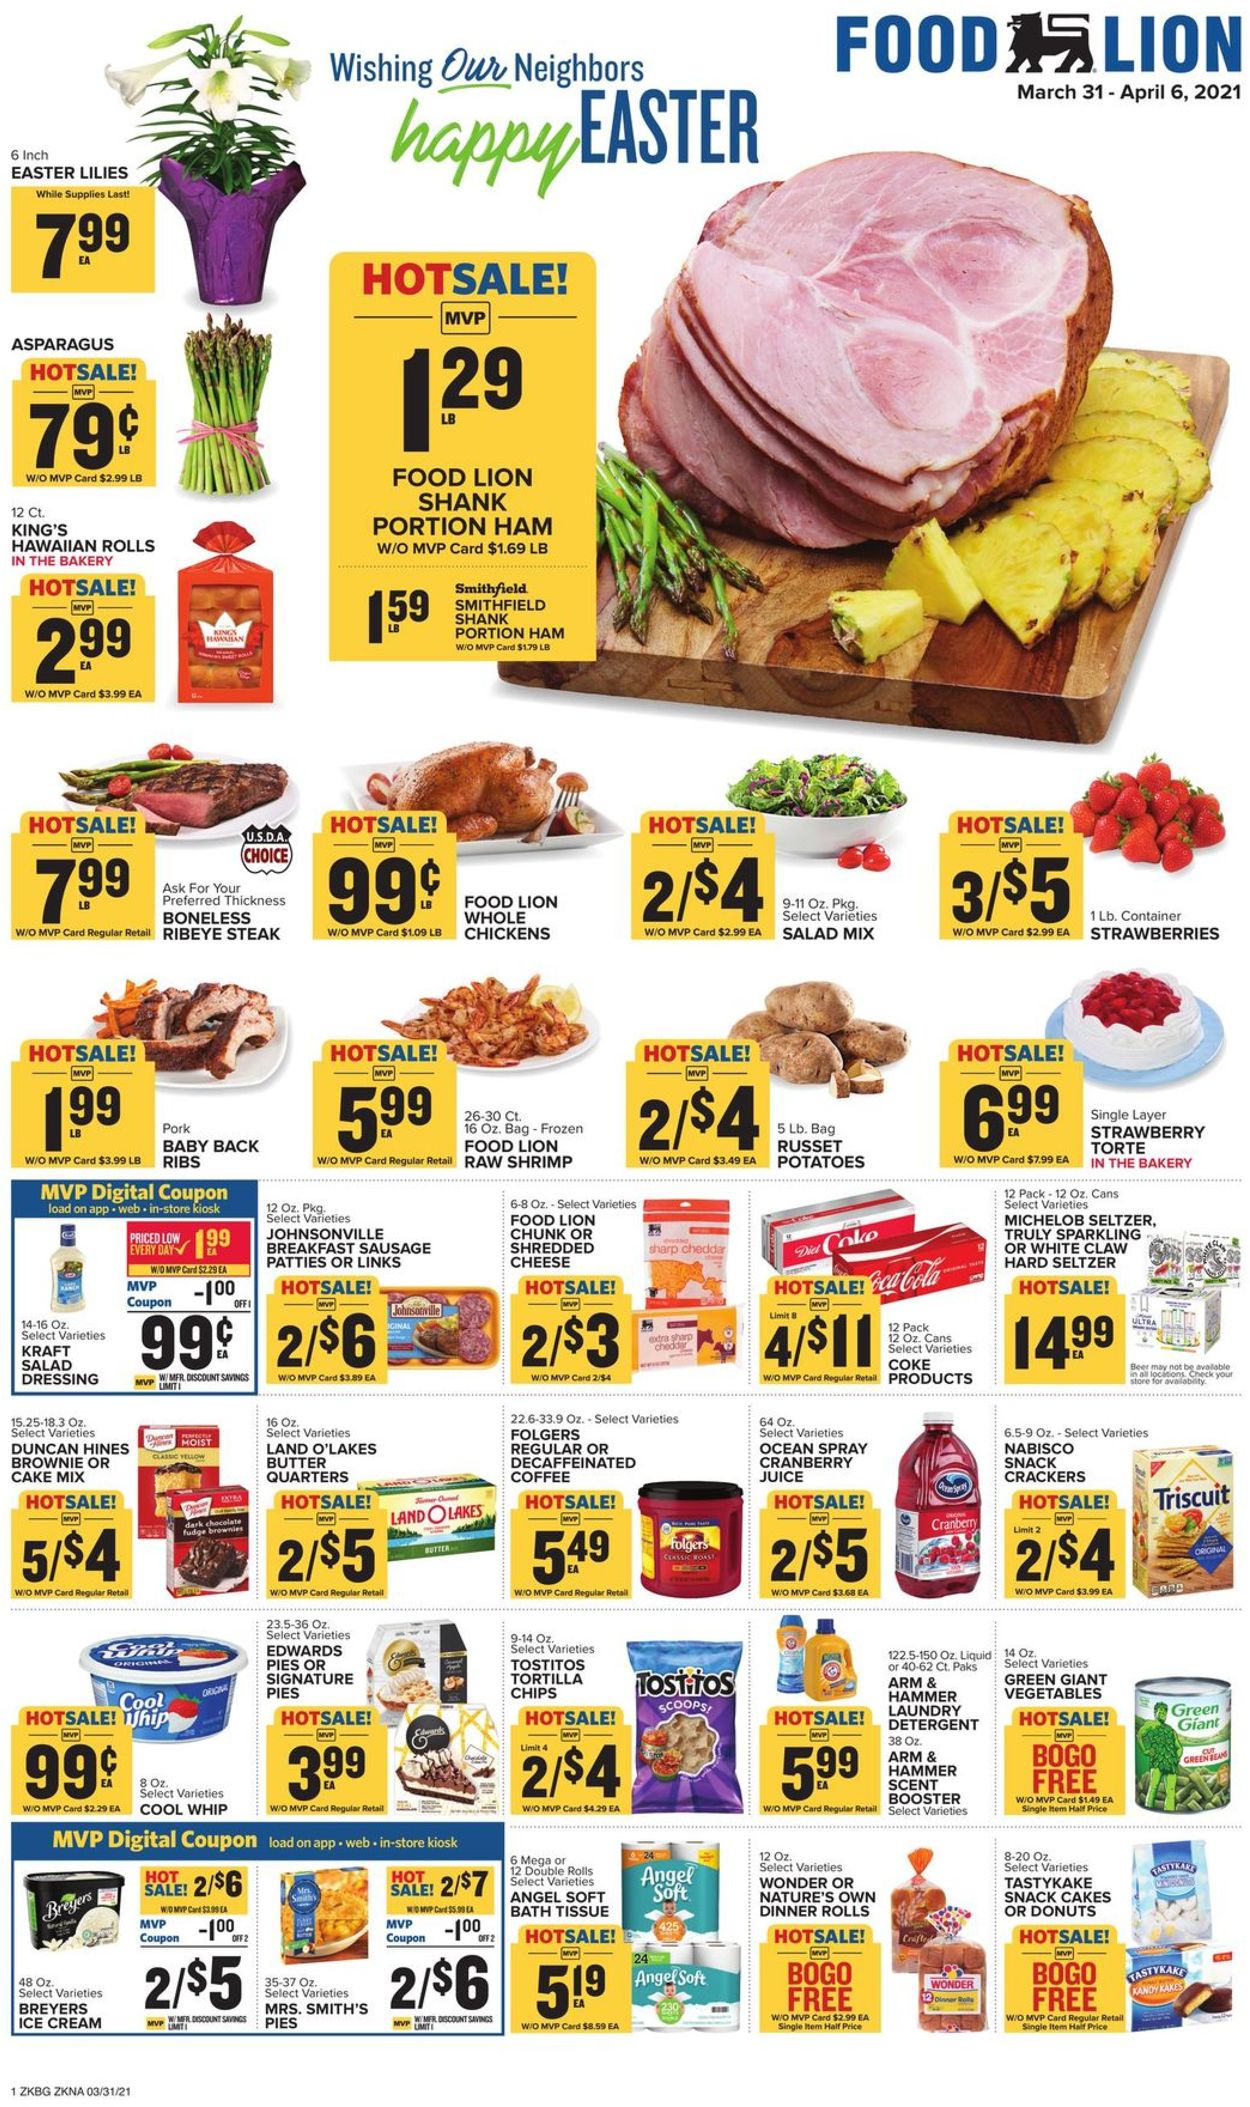 Food Lion Easter 2021 ad Current weekly ad 03/31 04/06/2021